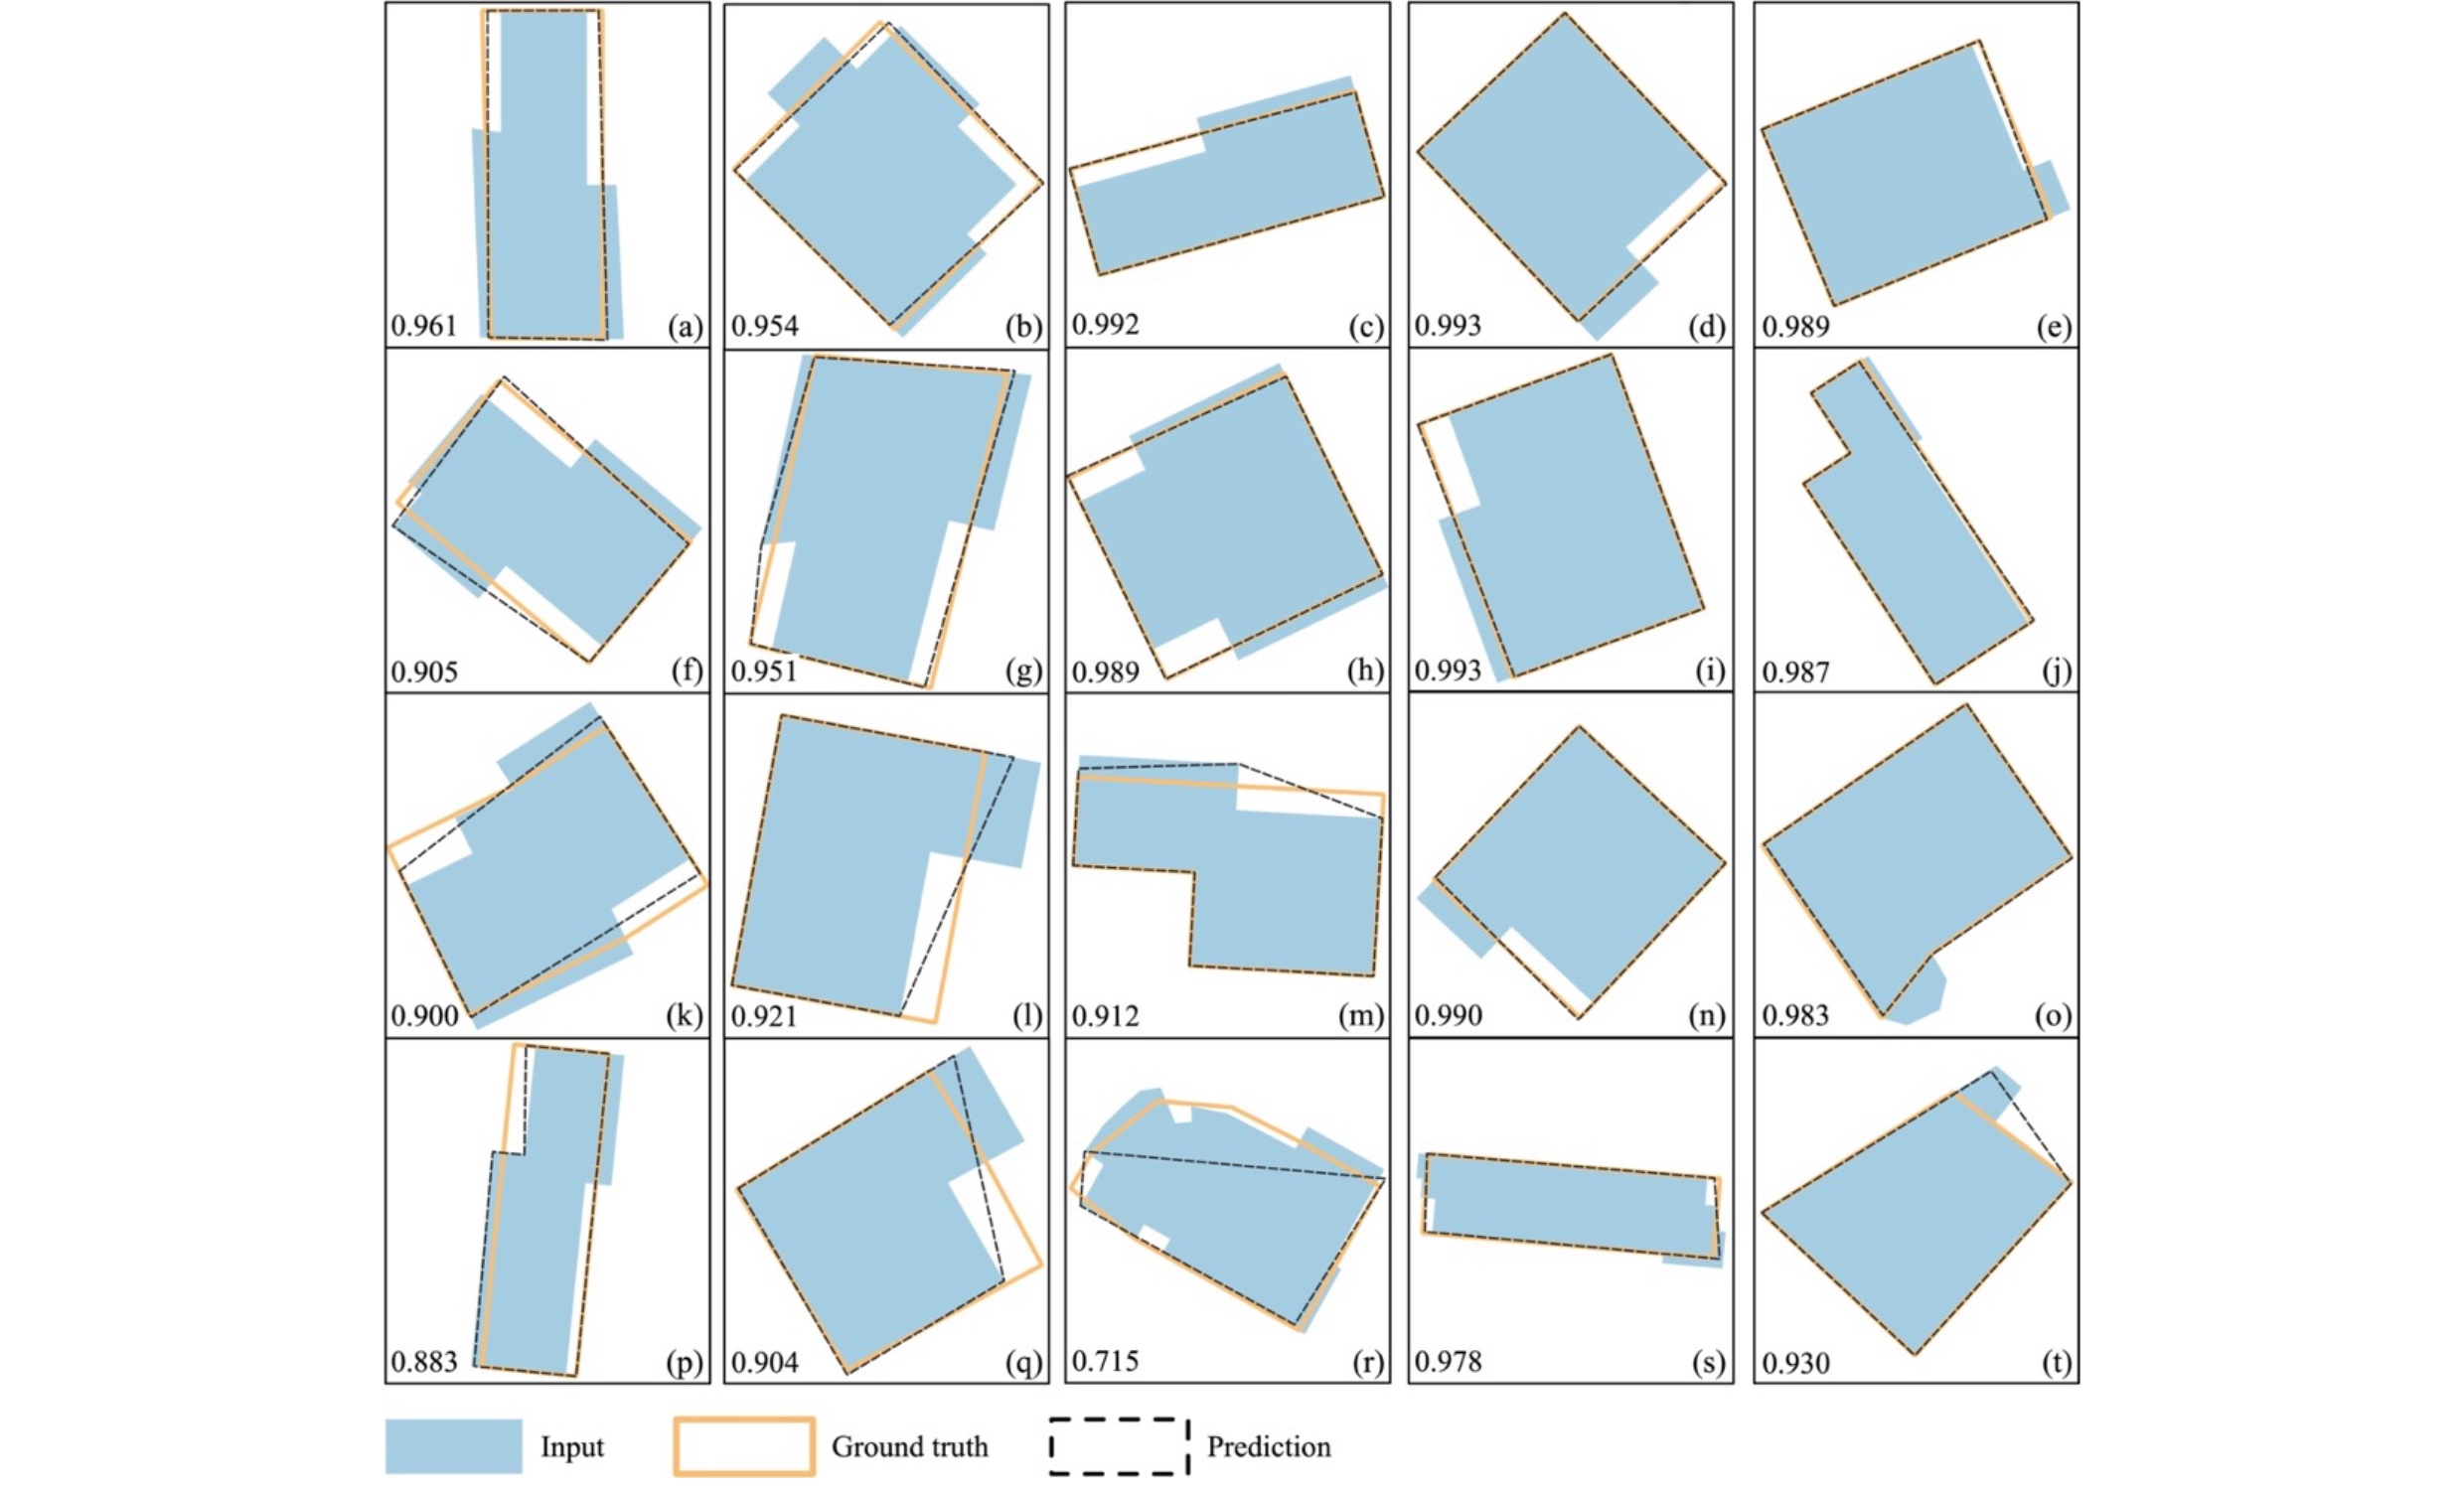 How can deep learning models learn to simplify buildings in map generalization?